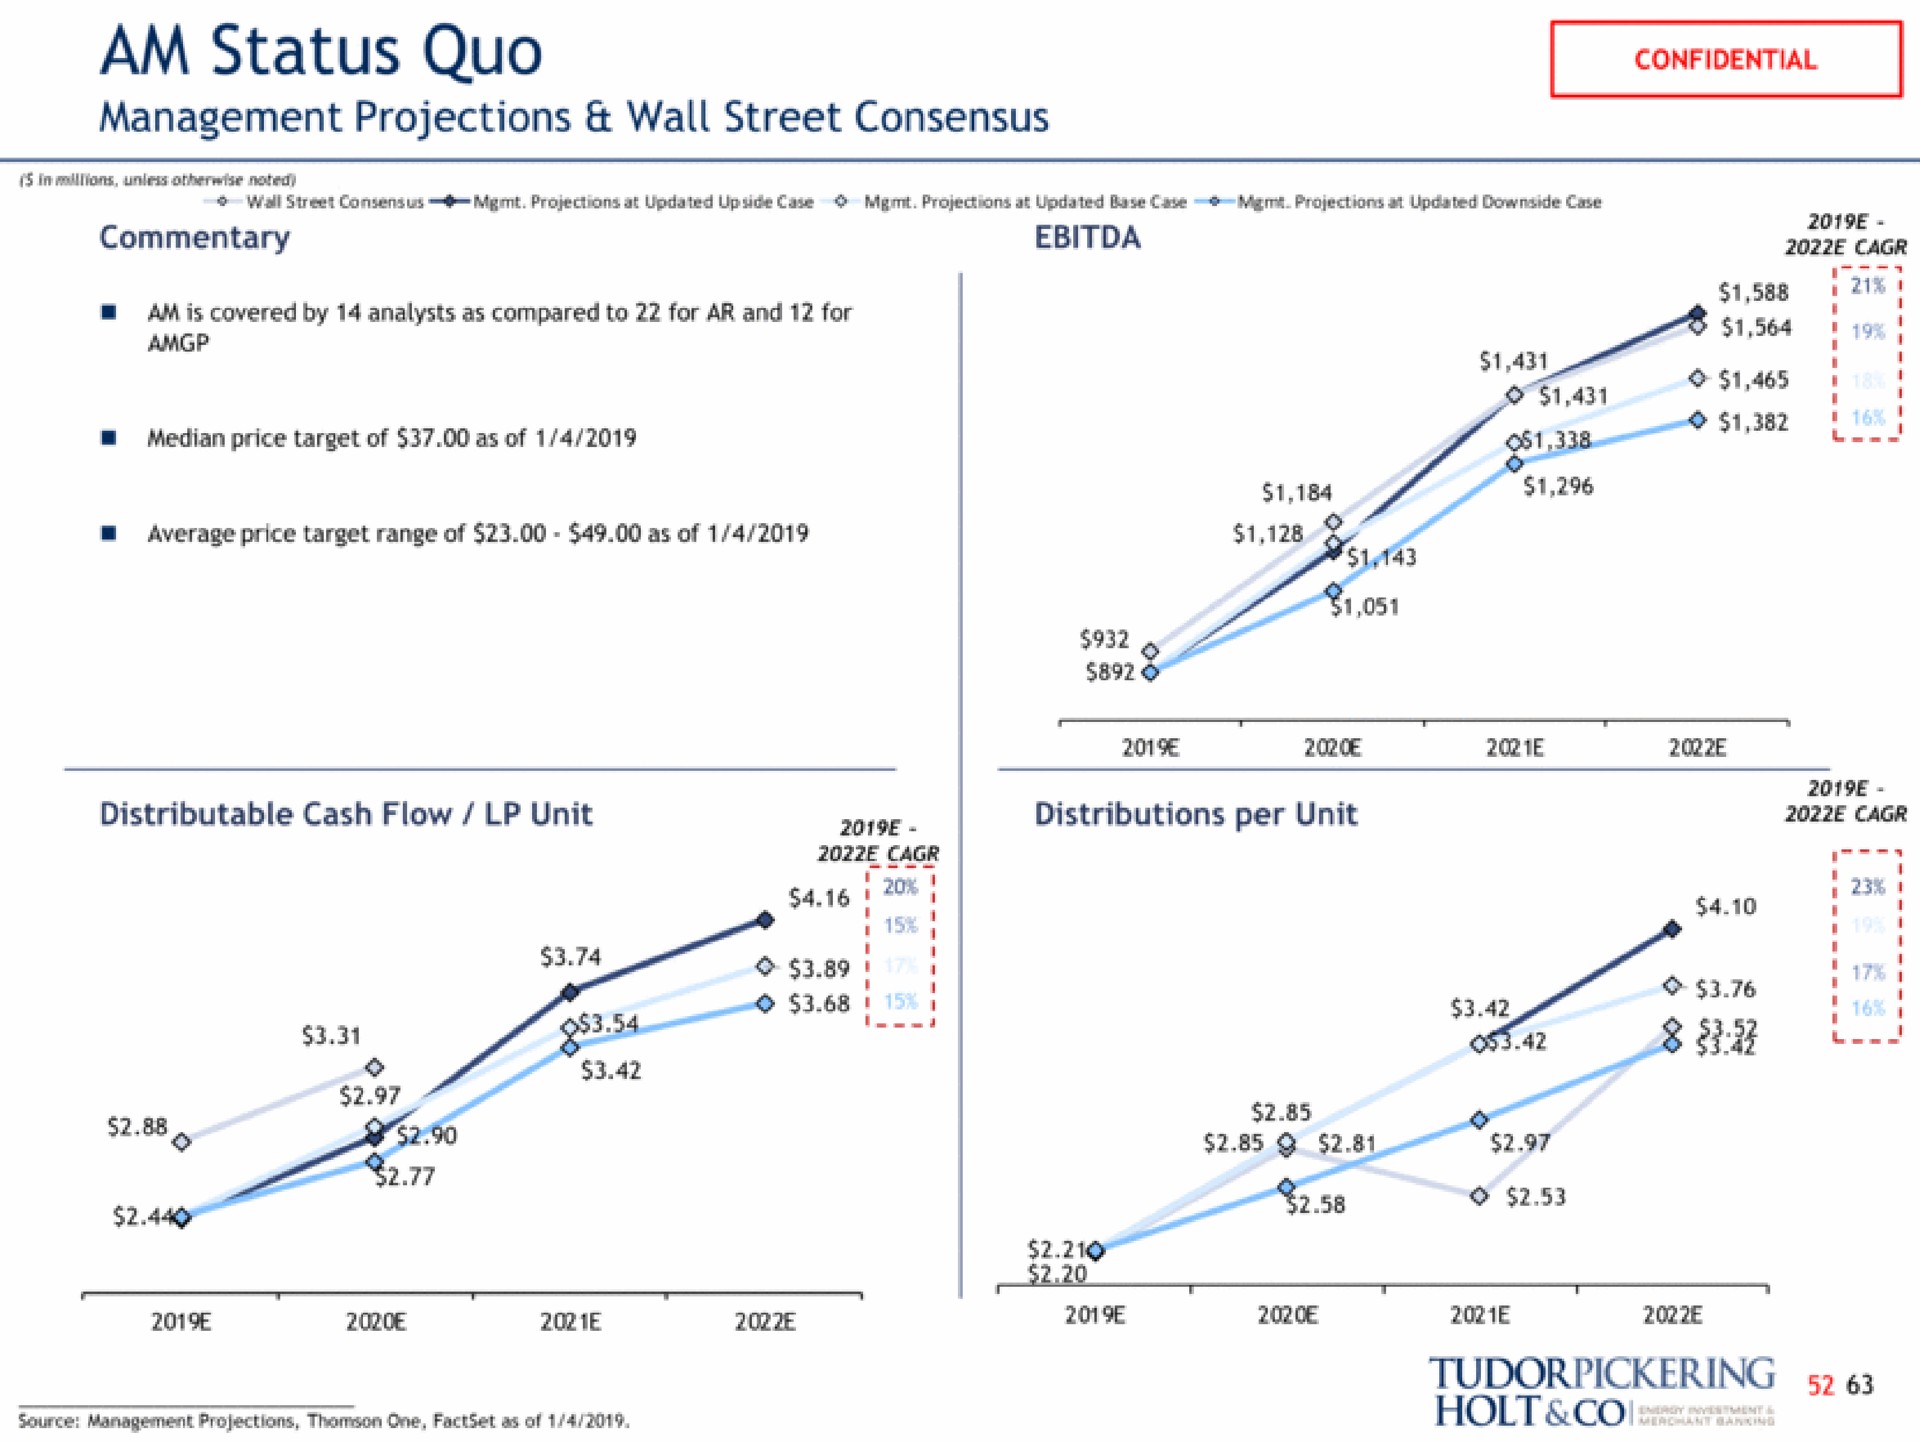 am status quo management projections wall street consensus | Tudor, Pickering, Holt & Co